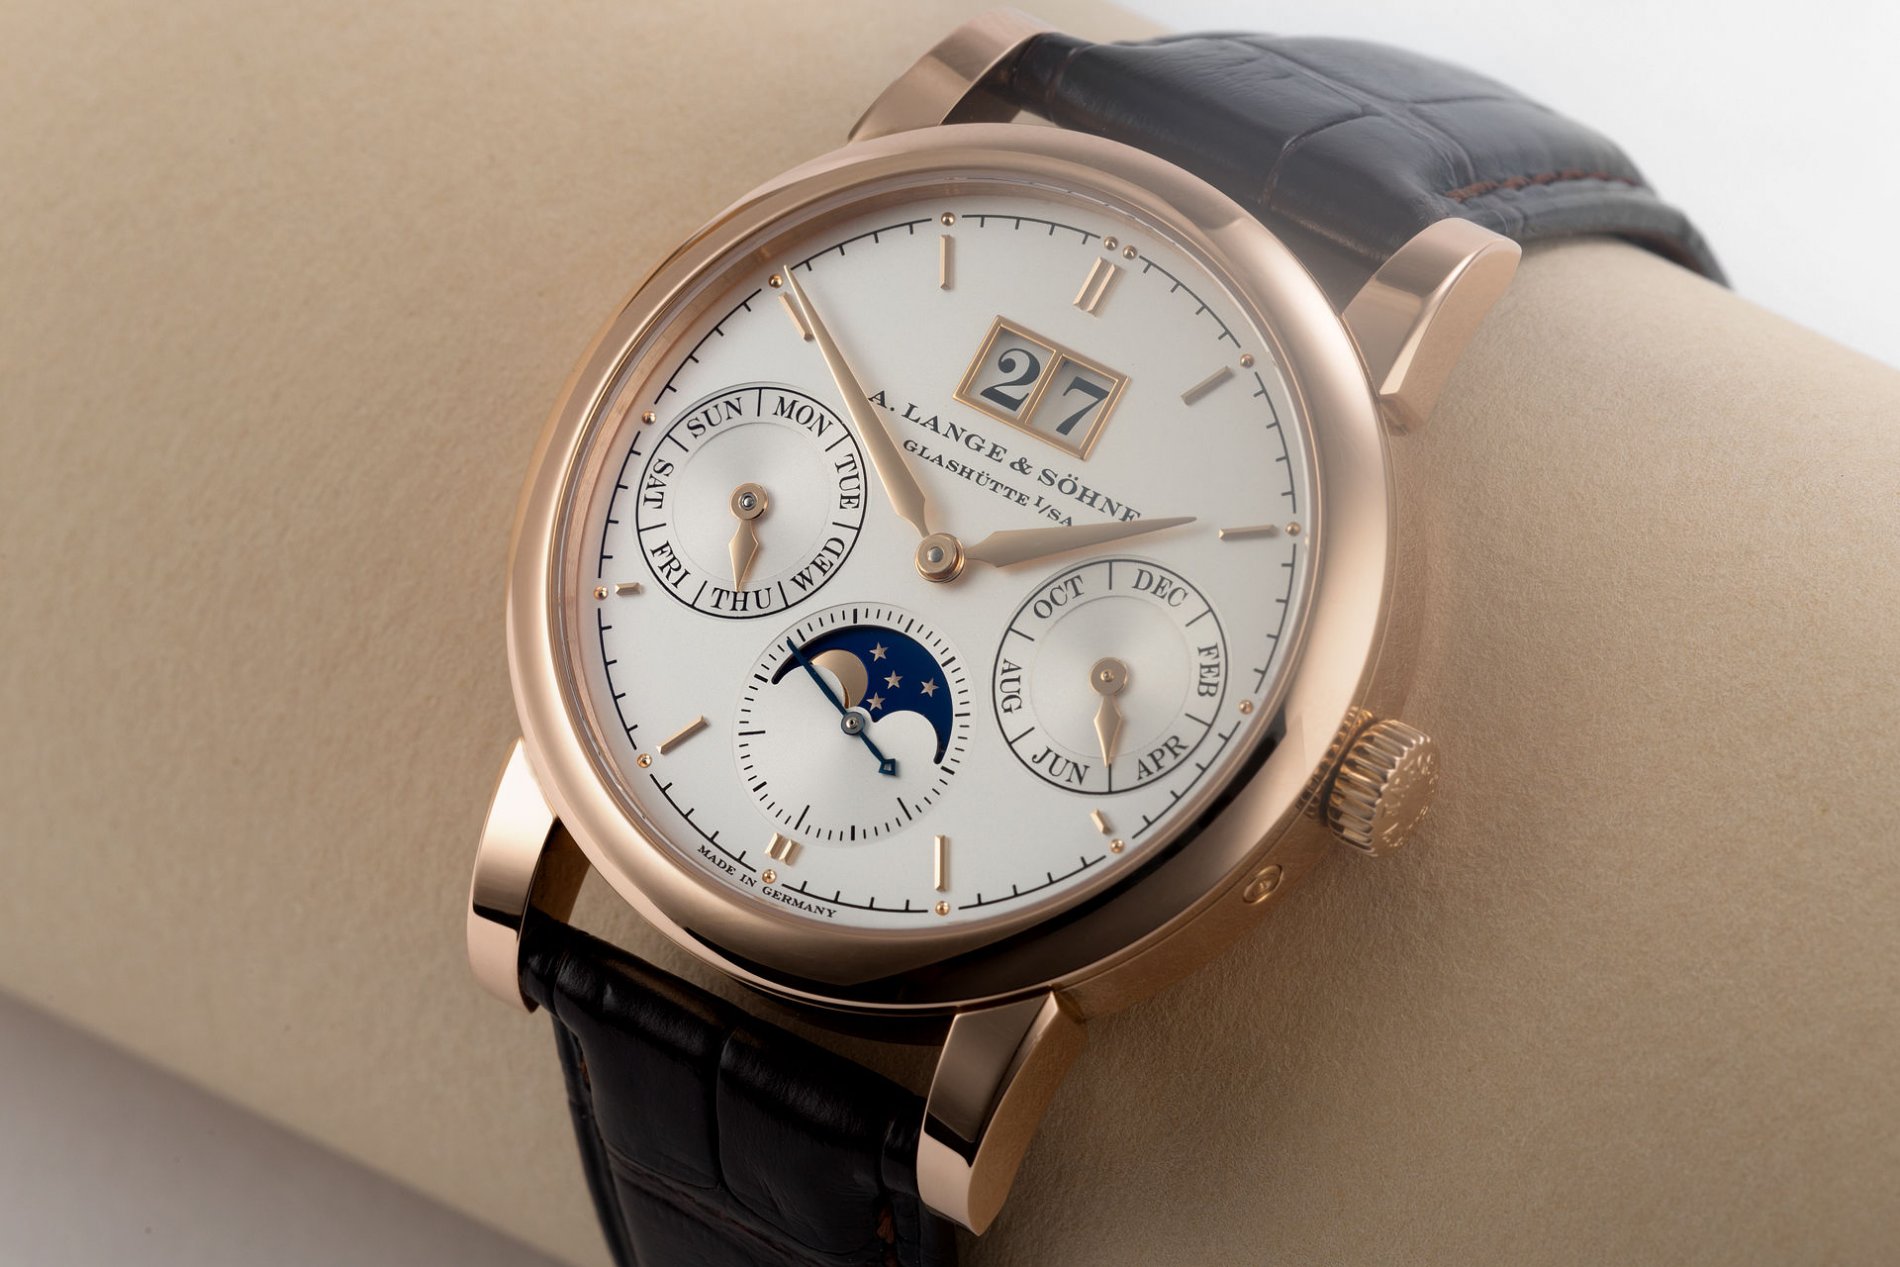   a-lange-and-sohne-saxonia-annual-calendar-385mm-18ct-rose-gold-ref-330032e-year-2011-12.jpeg